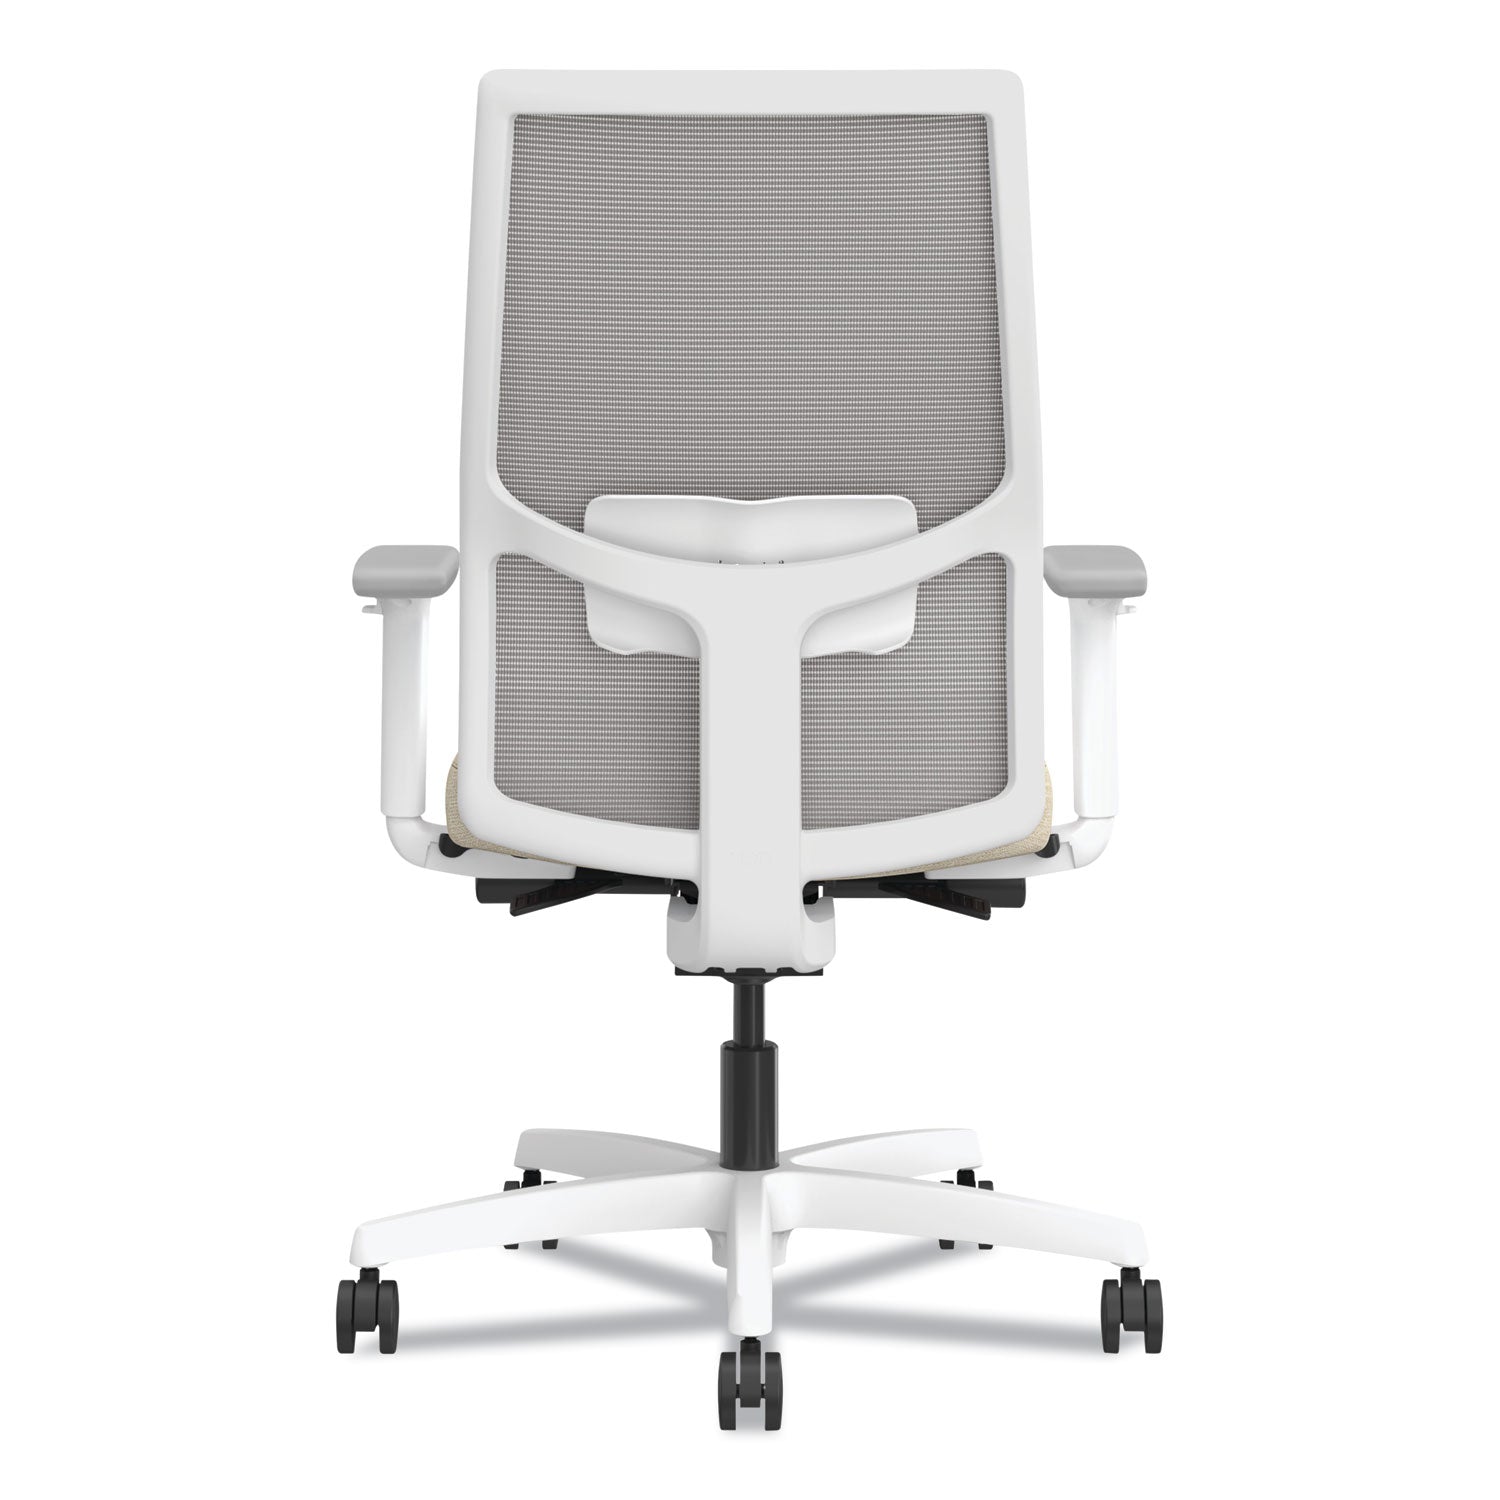 ignition-20-4-way-stretch-mid-back-task-chair-white-adjustable-lumbar-support-biscotti-fog-white-ships-in-7-10-bus-days_honi2mm2afh11wx - 2